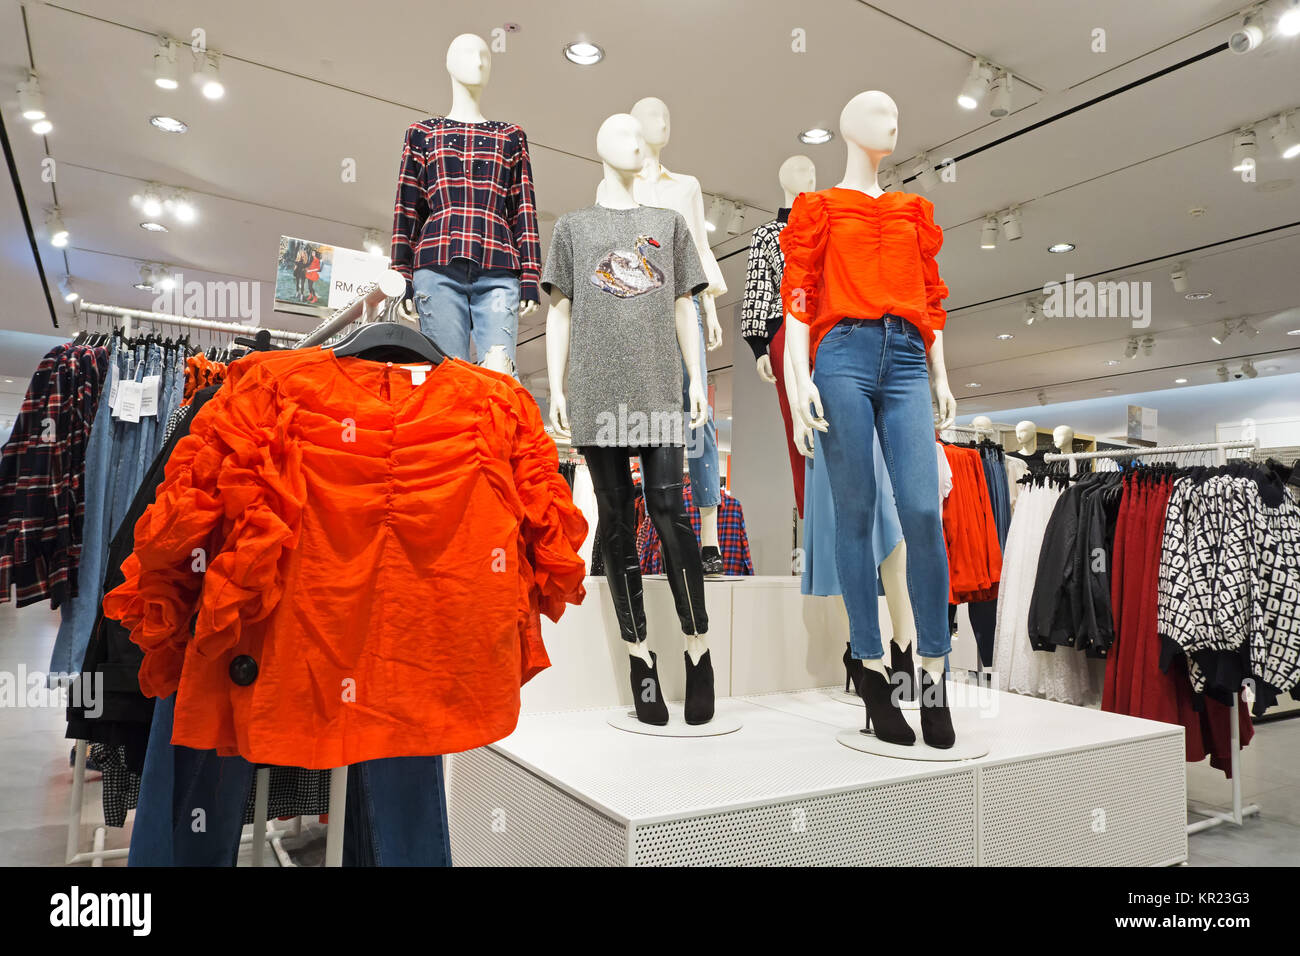 Kota Kinabalu, Malaysia - December 14, 2017: Inside of H and M store in Imago Shopping Mall. H&M is a Swedish multinational retail-clothing company fo Stock Photo